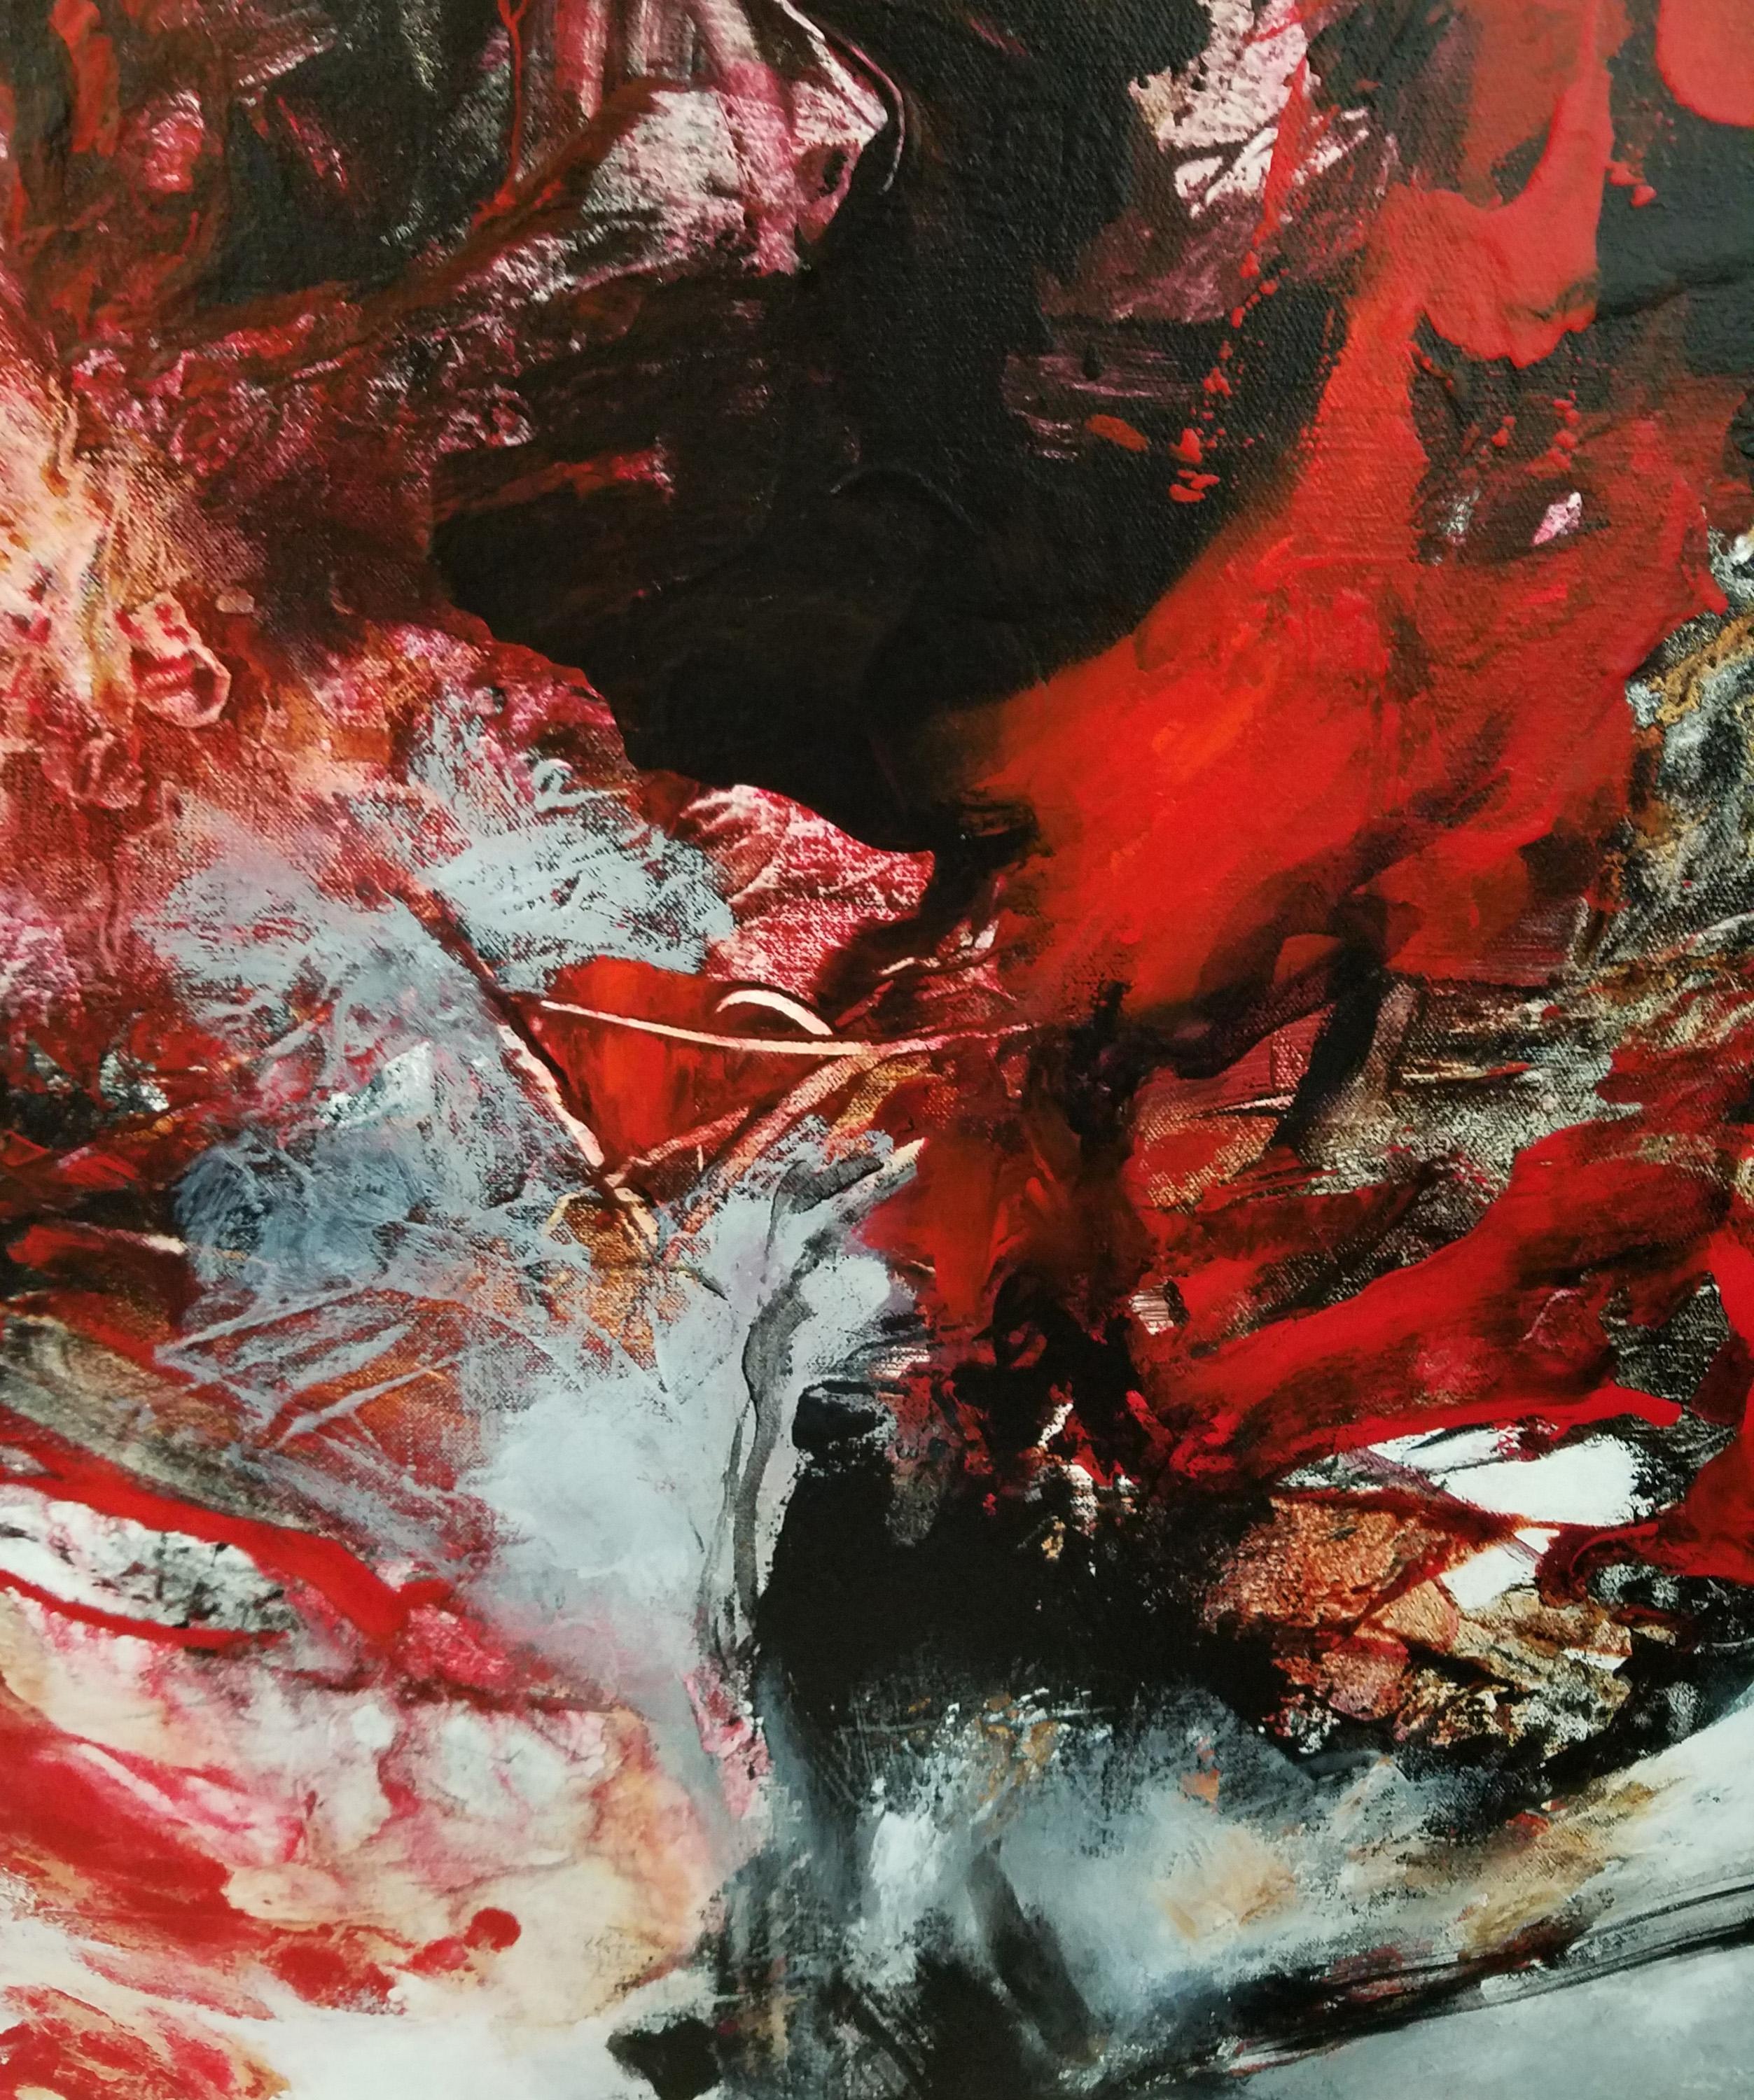 How to Grow a Diamond - Powerful Gestural Abstract Painting, Red + Black + White 1